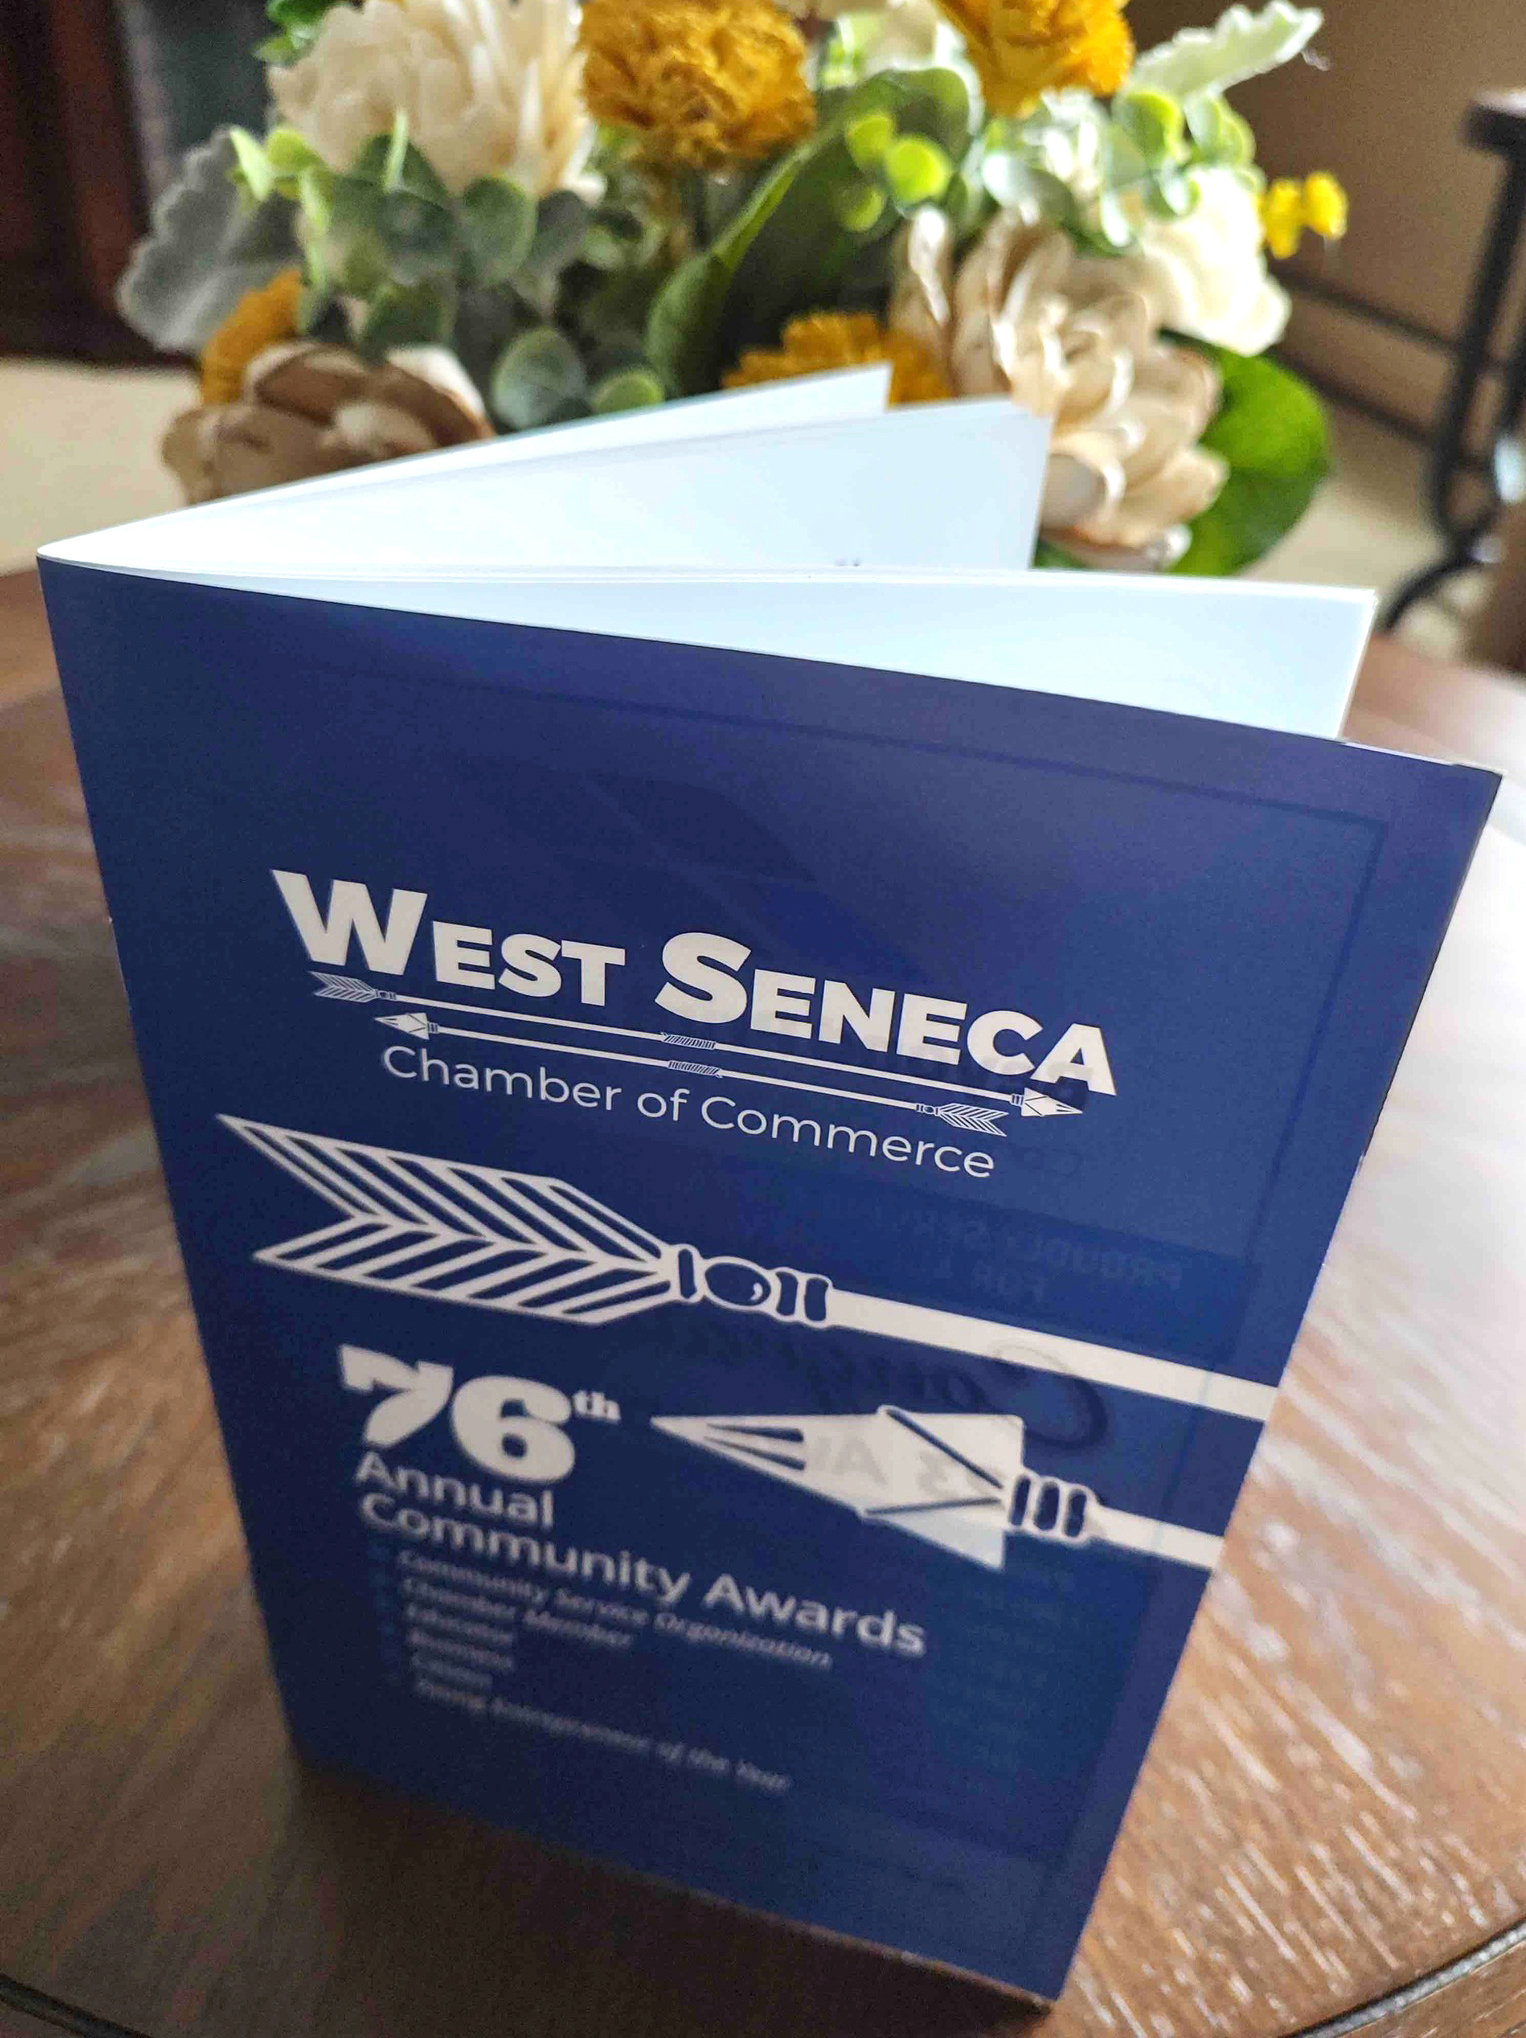 West Seneca Chamber of Commerce printed awards booklet